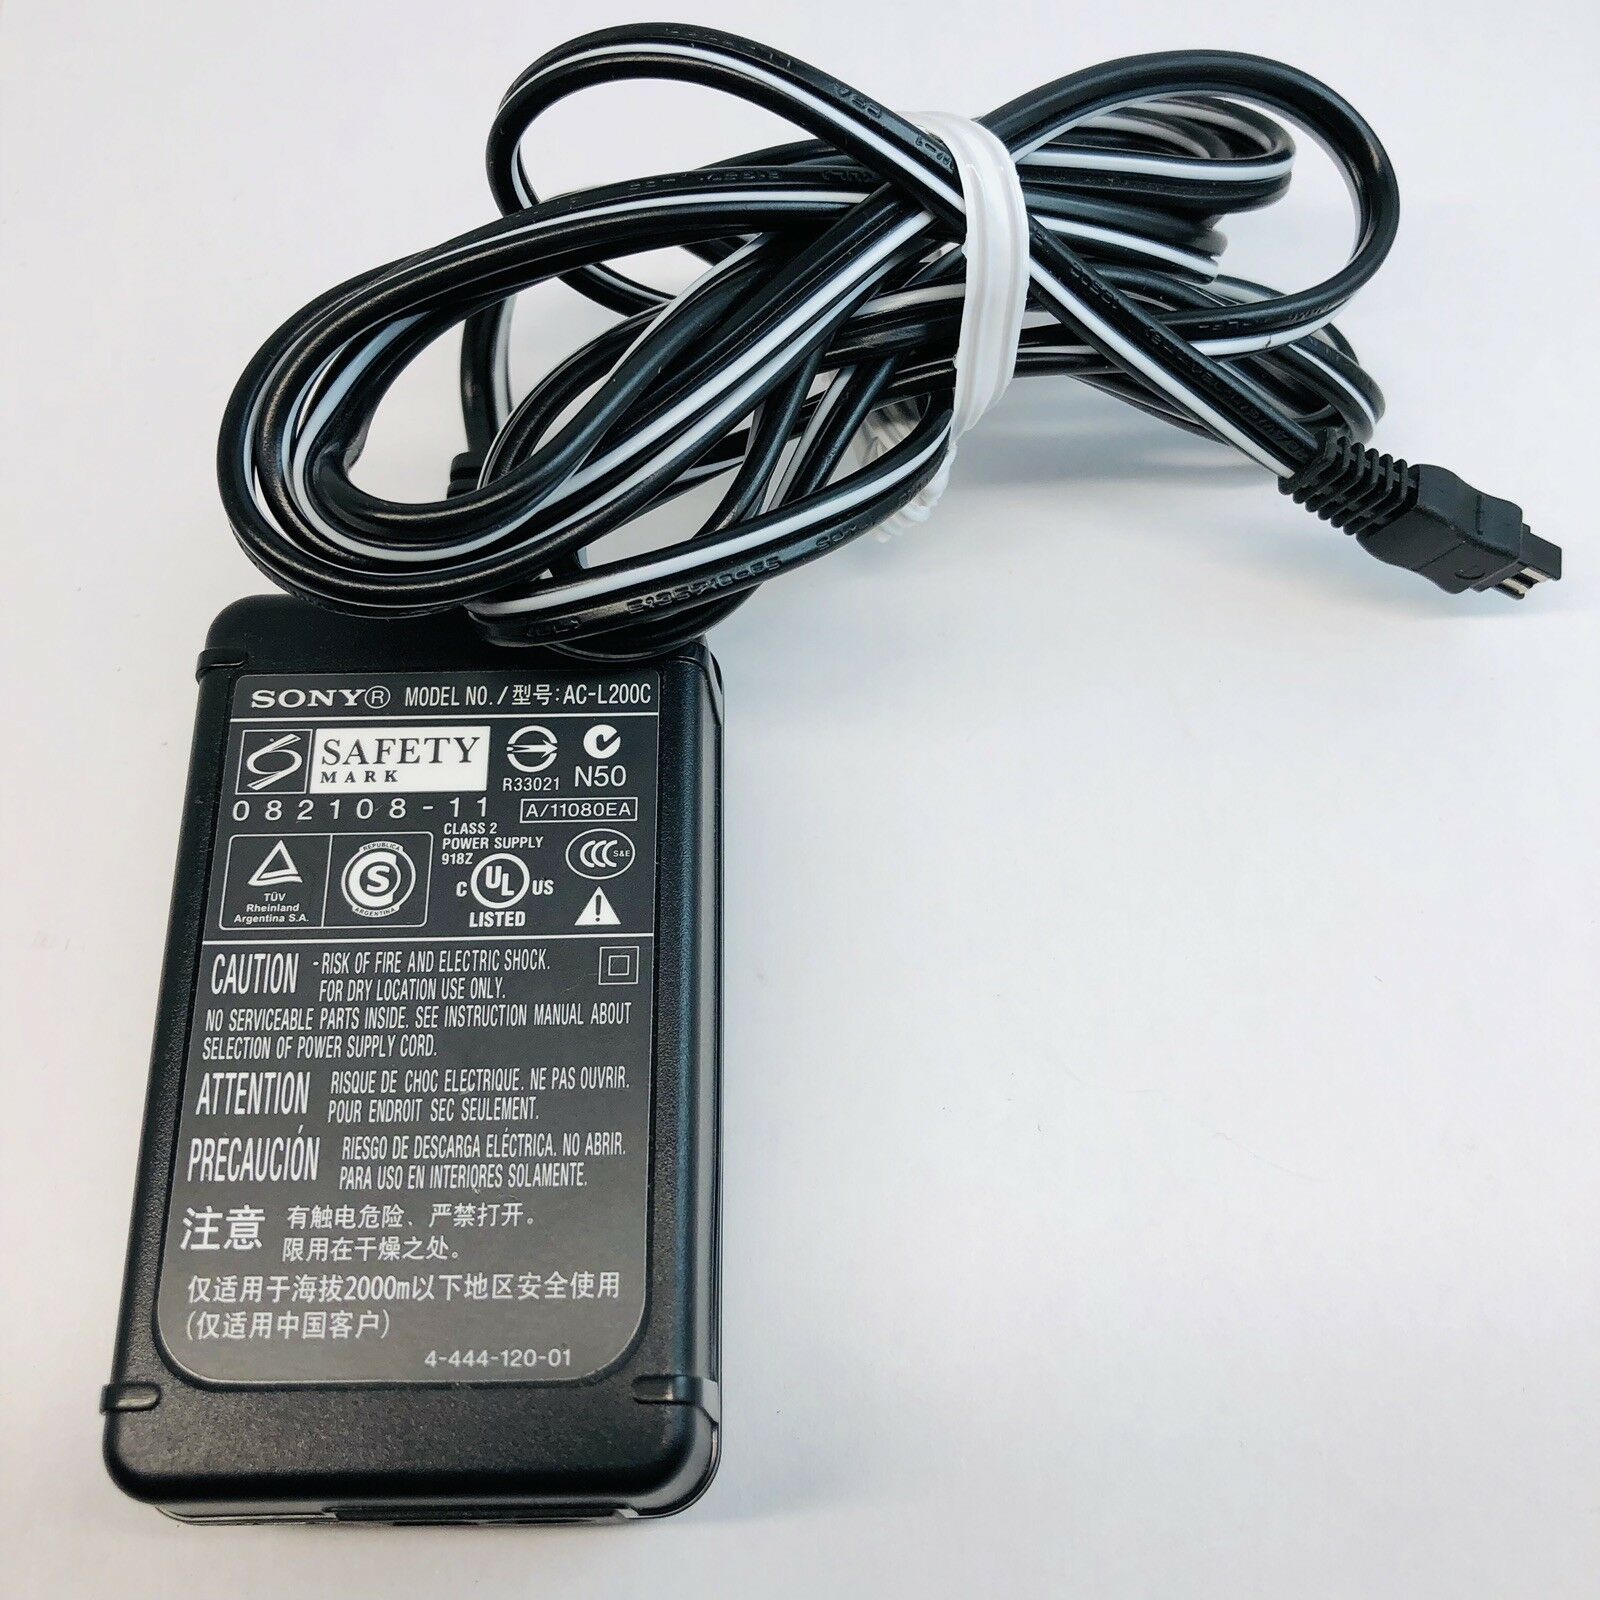 Genuine SONY AC-L200C AC Power Adapter 8.4V - 1.7A Brand: Sony Output Voltage(s): 8.4V - 1.7A Type: AC Power Adapter - Click Image to Close